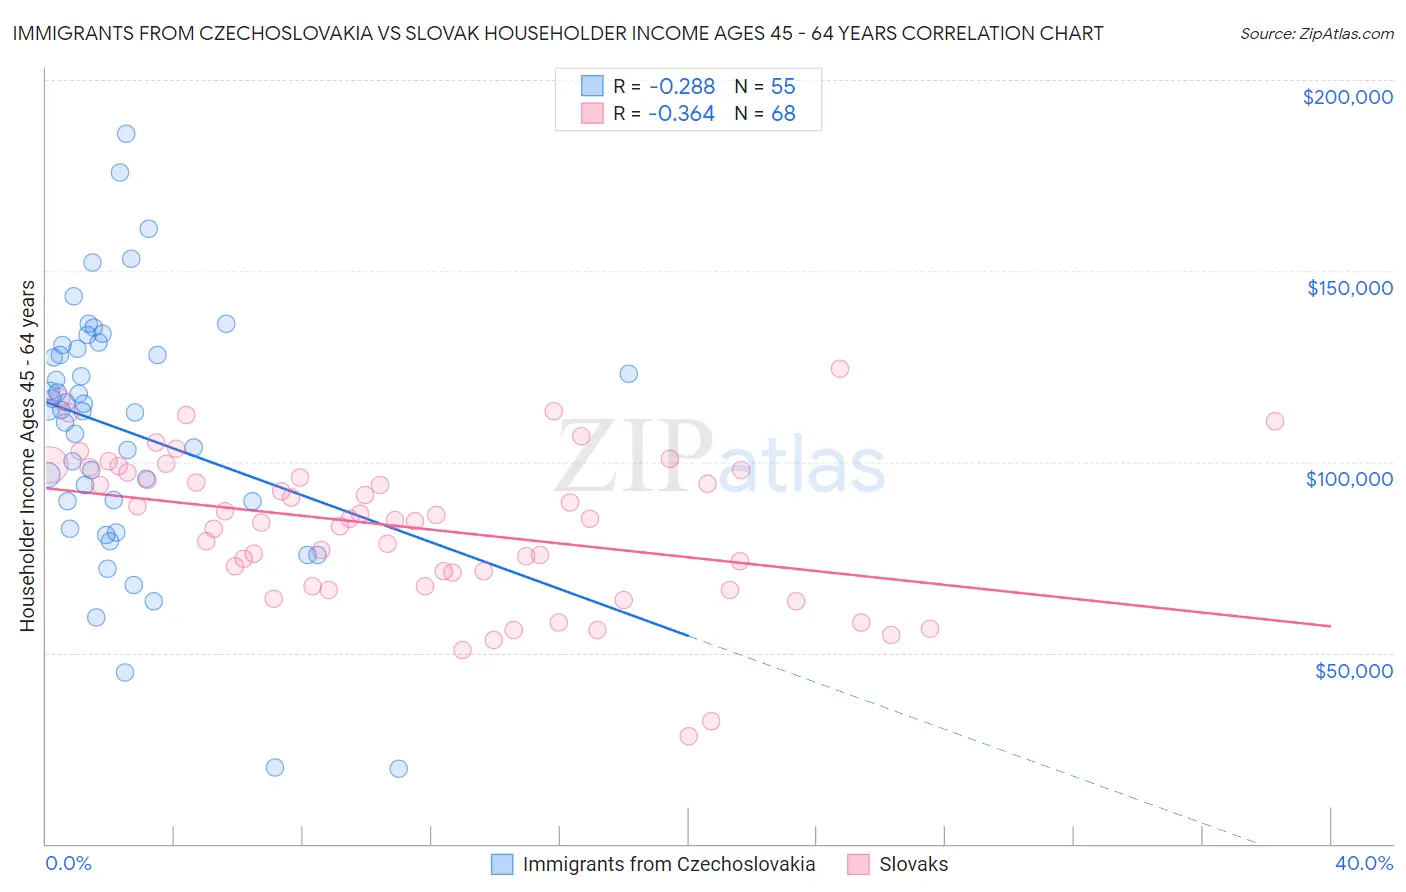 Immigrants from Czechoslovakia vs Slovak Householder Income Ages 45 - 64 years